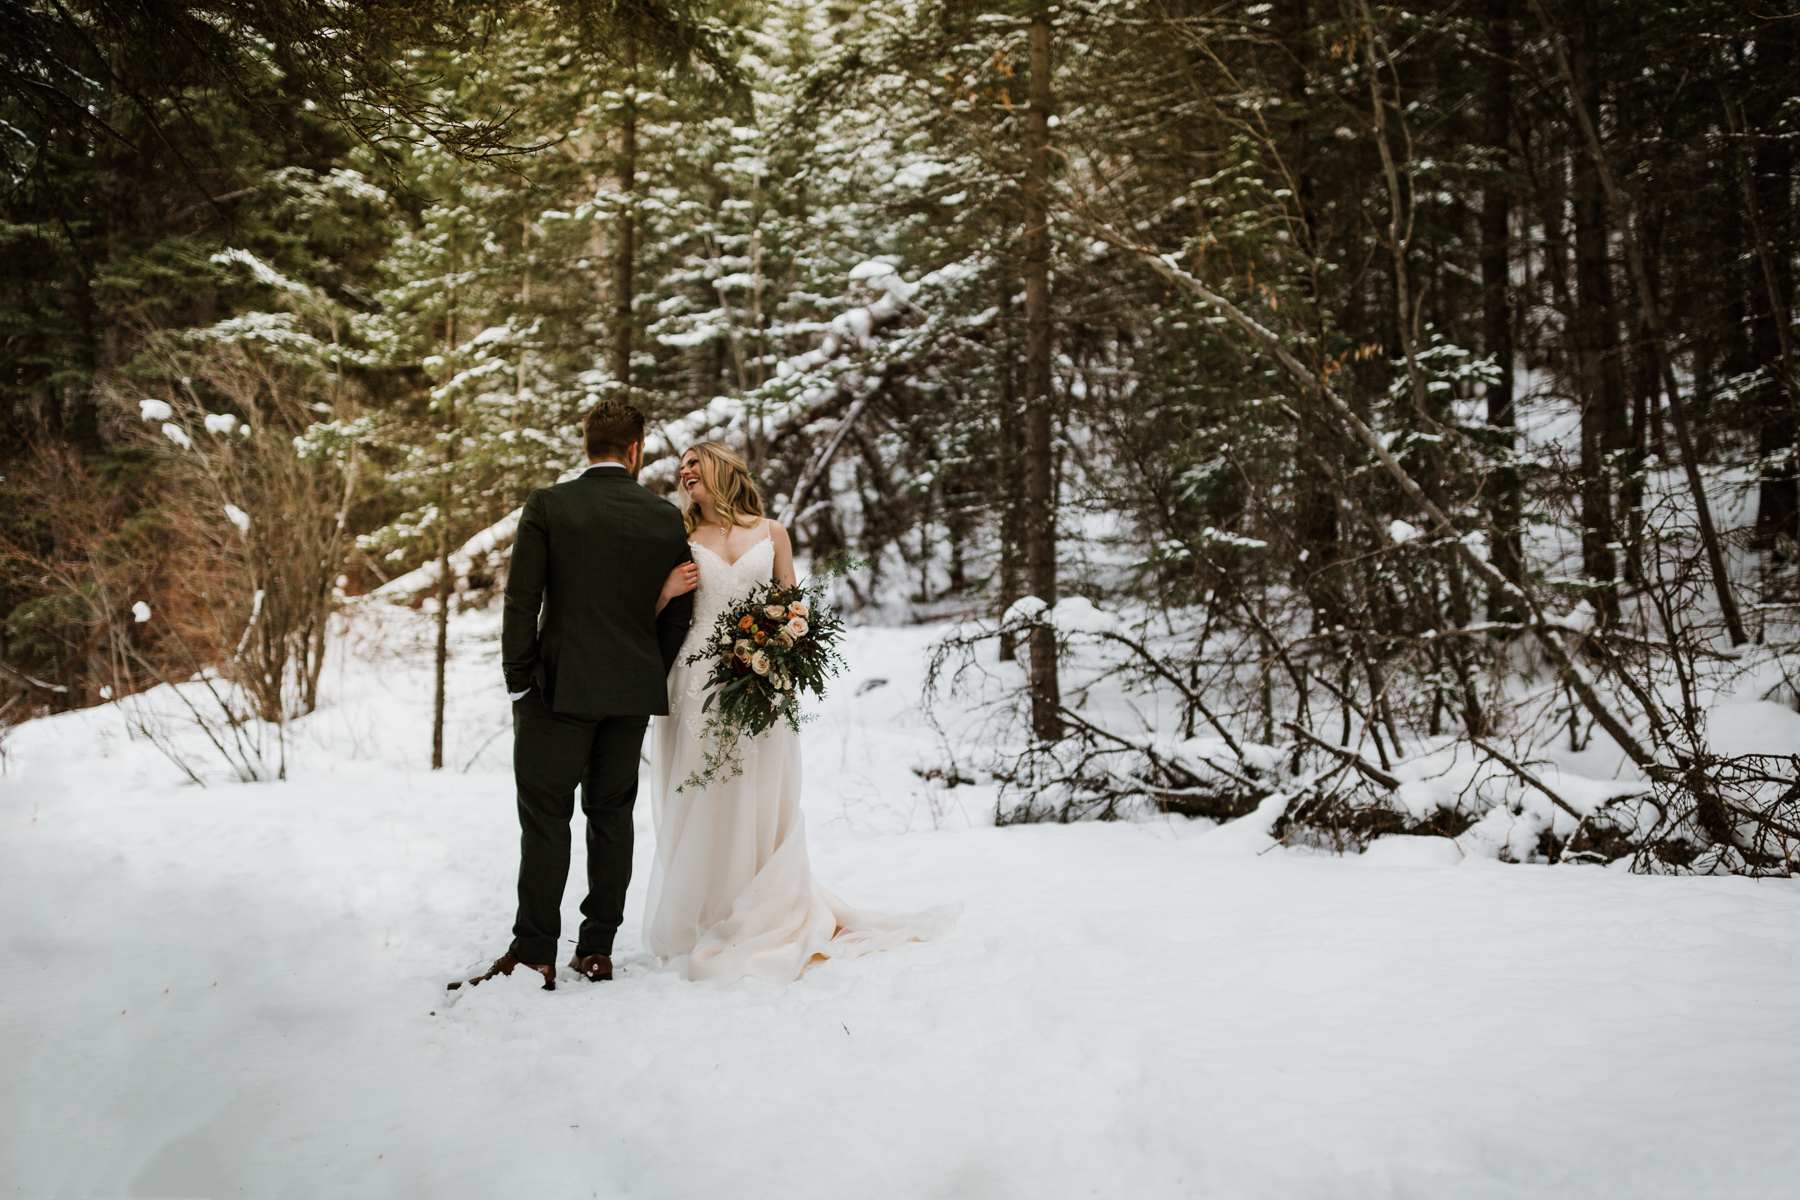 Canmore Elopement Photographer in the Canadian Rockies - Image 42